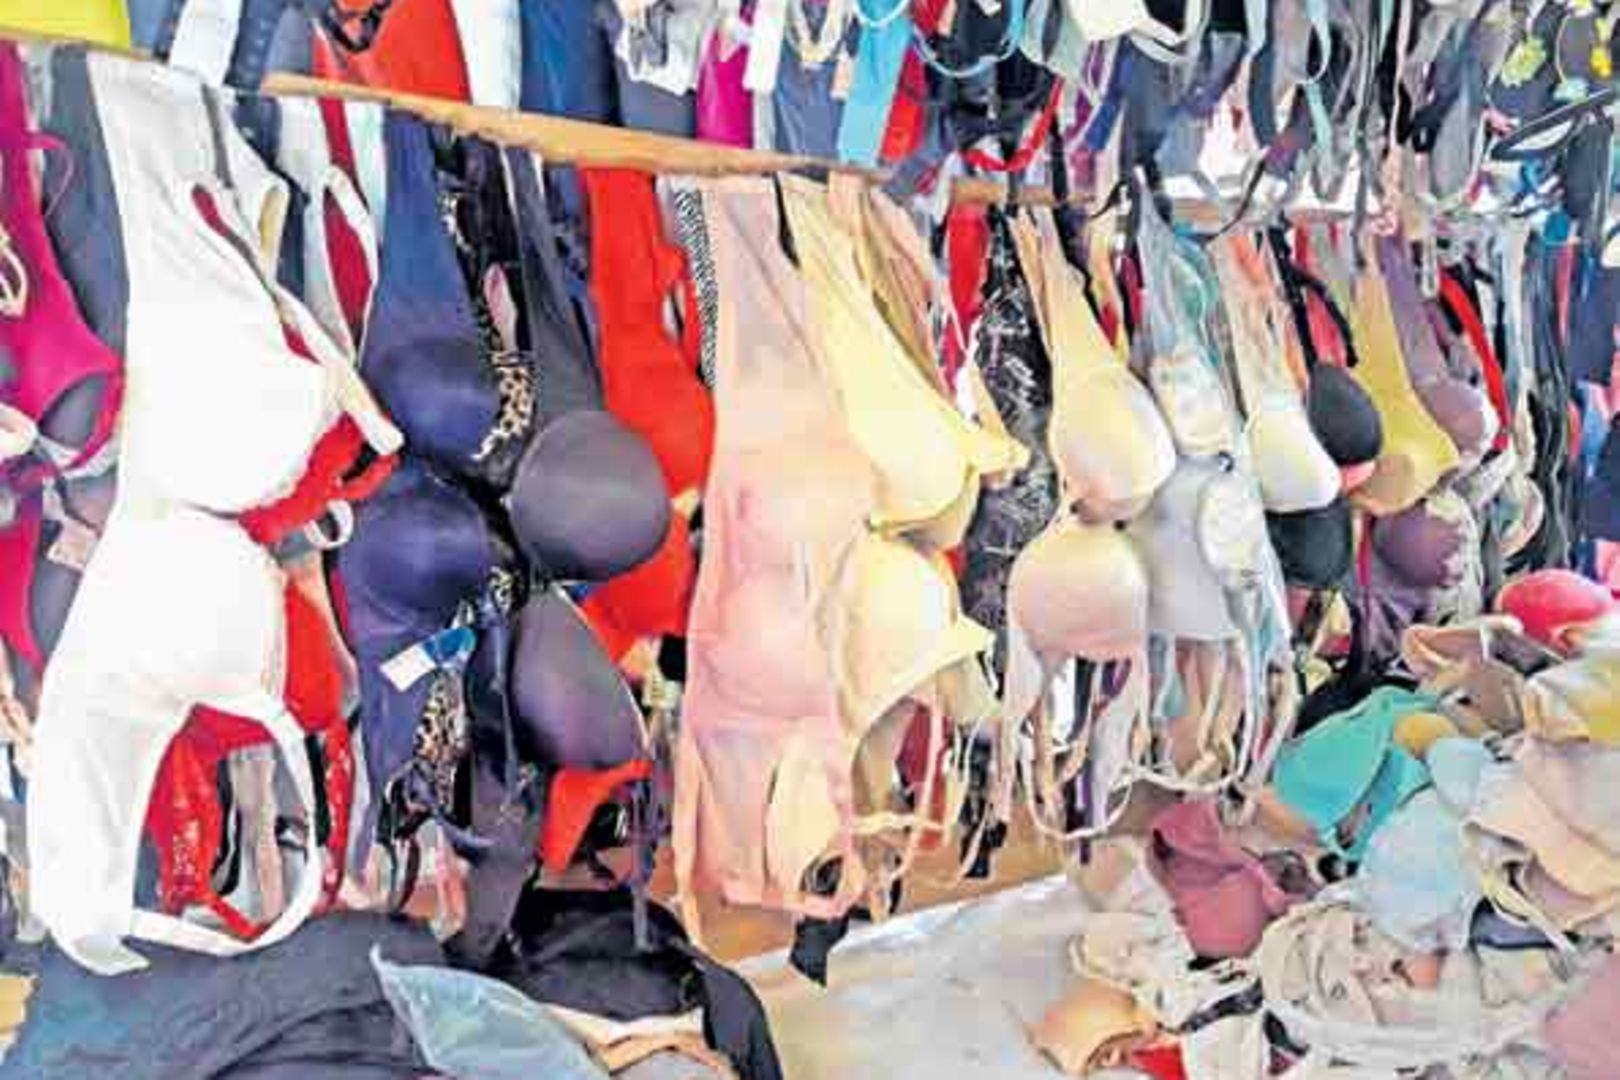 How I Made $15,000 In One Year Selling My Used Underwear by Dalma